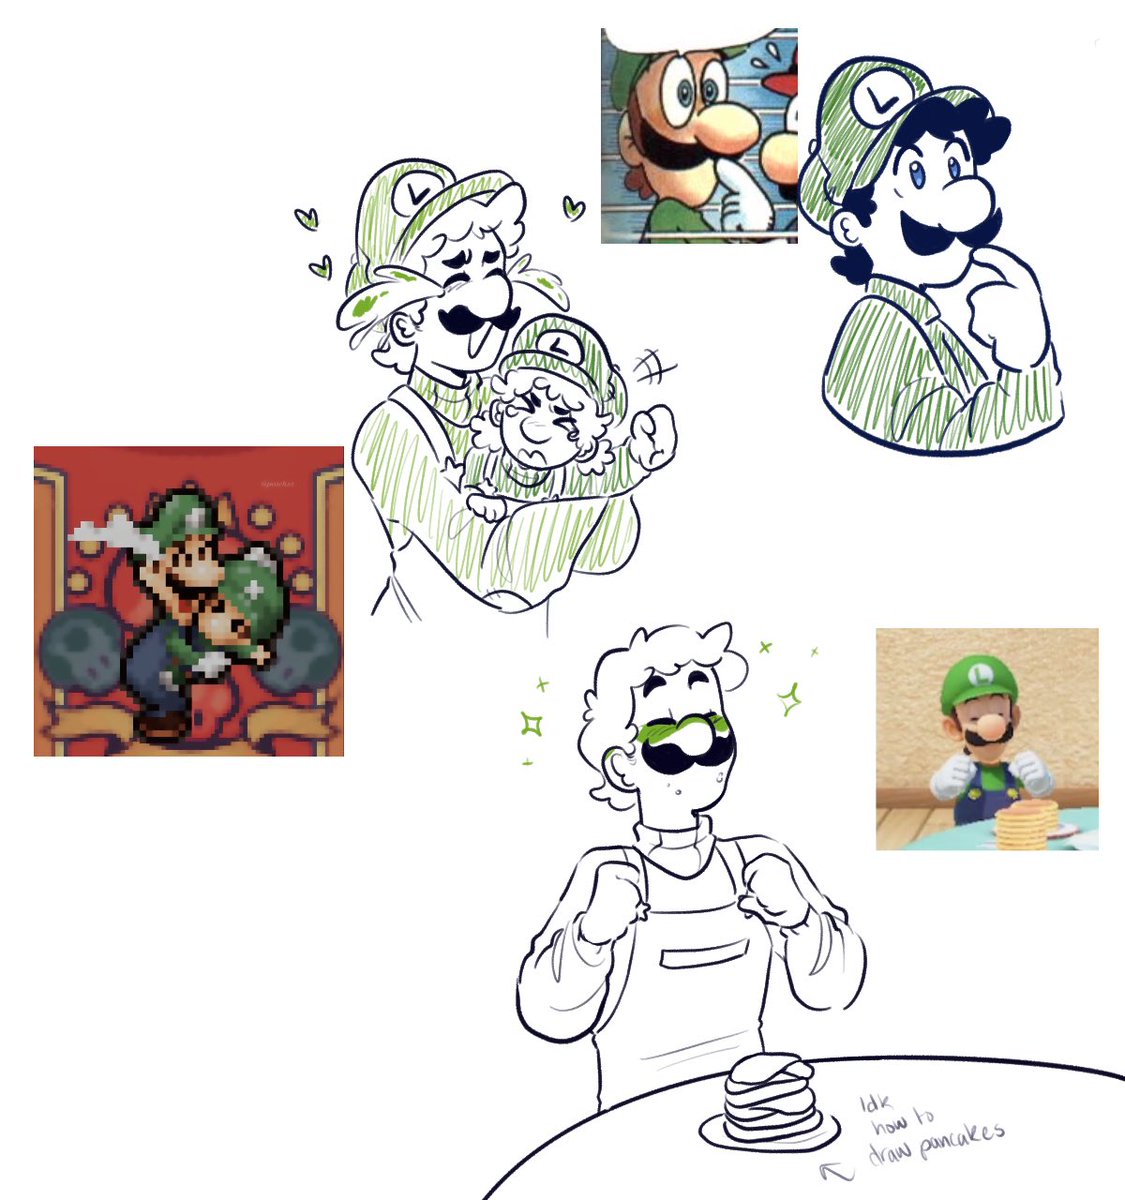 Some T4T Luaisy and then more Luigi doodles